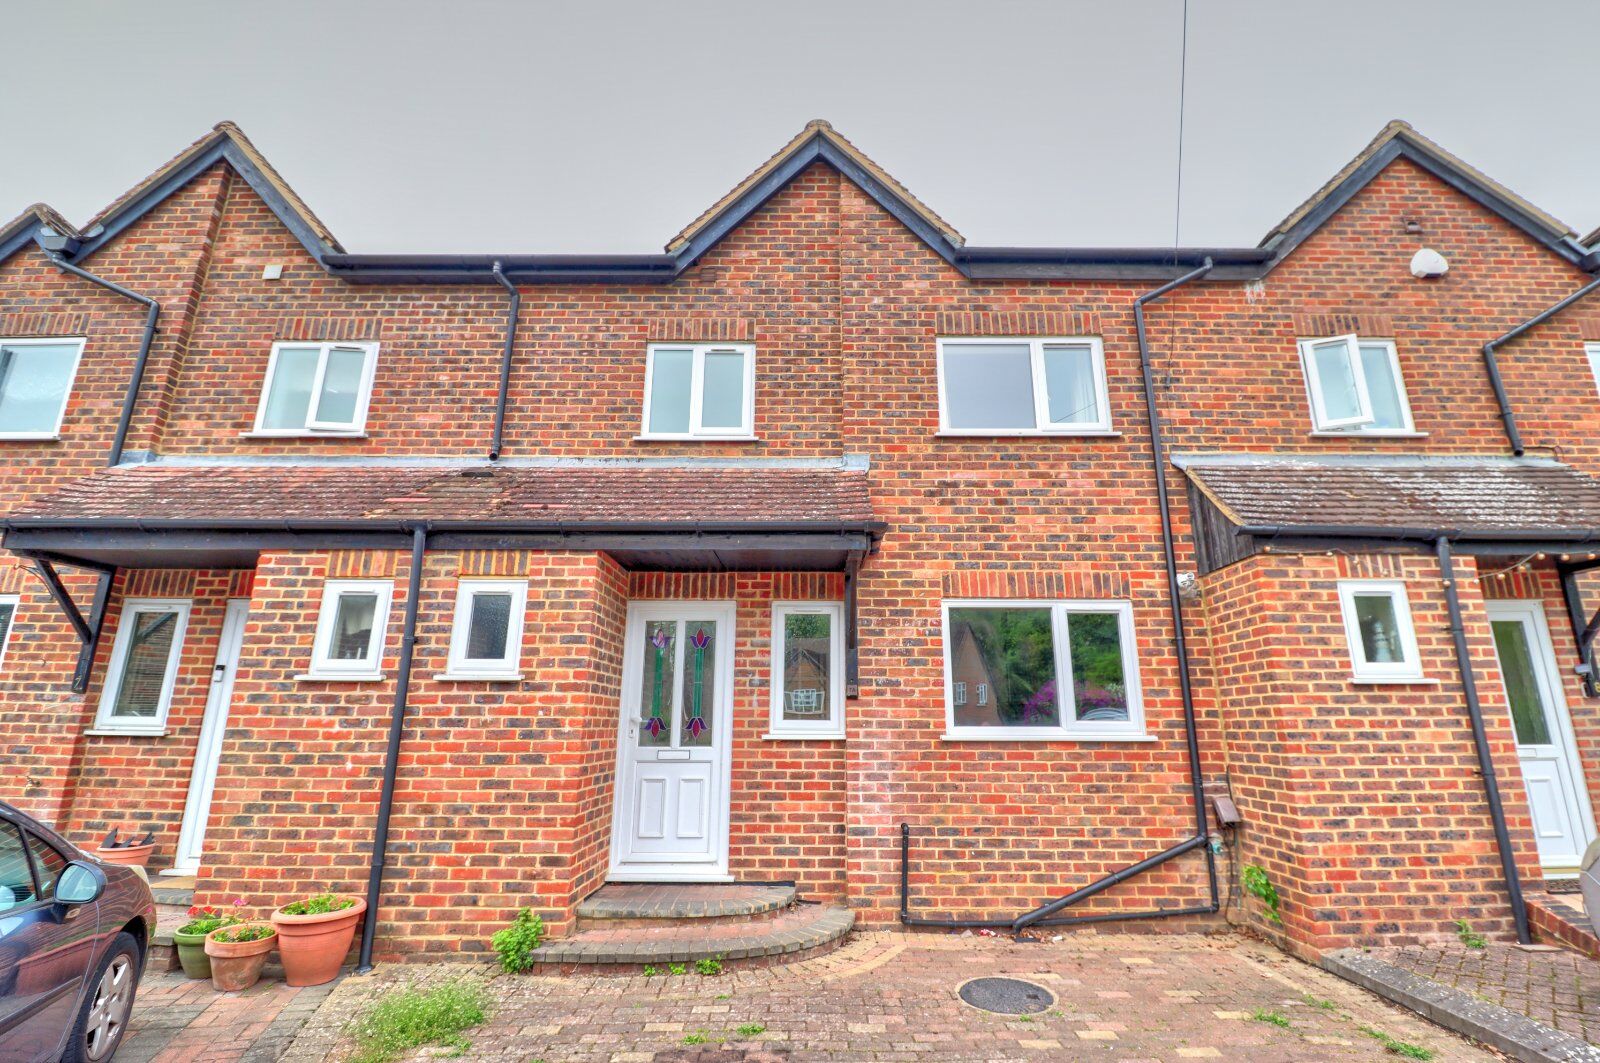 3 bedroom mid terraced house to rent, Available now Weller Road, Amersham, HP6, main image